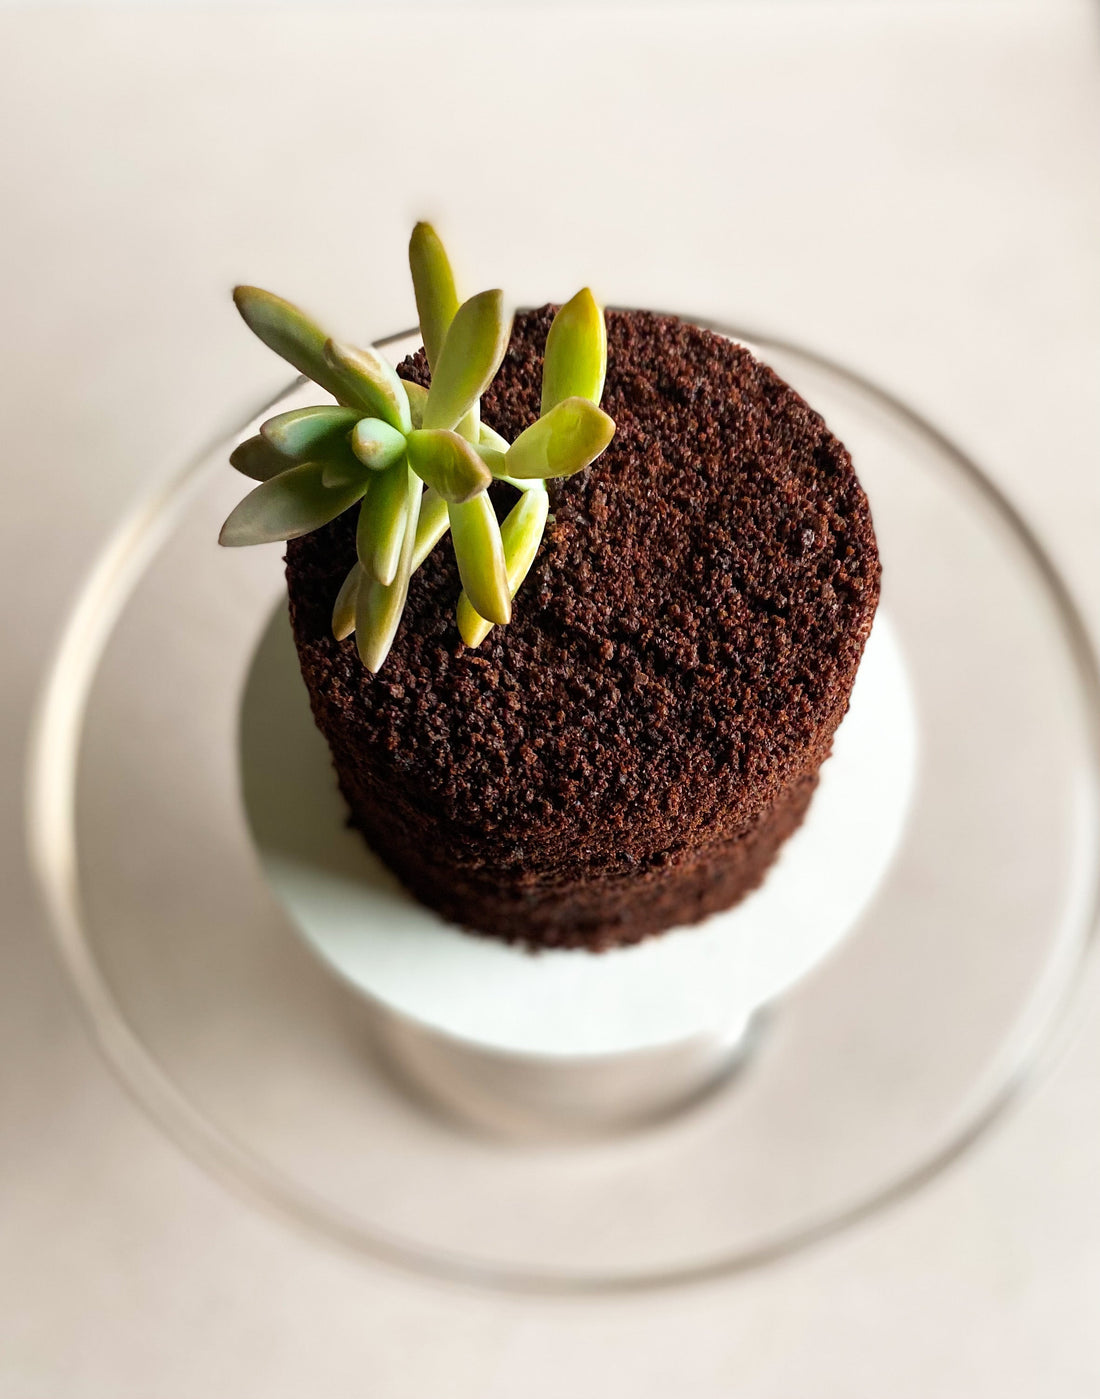 A top-down view of a round cake covered all over in ganache and chocolate crumbs. The top of the cake is decorated with a succulent.